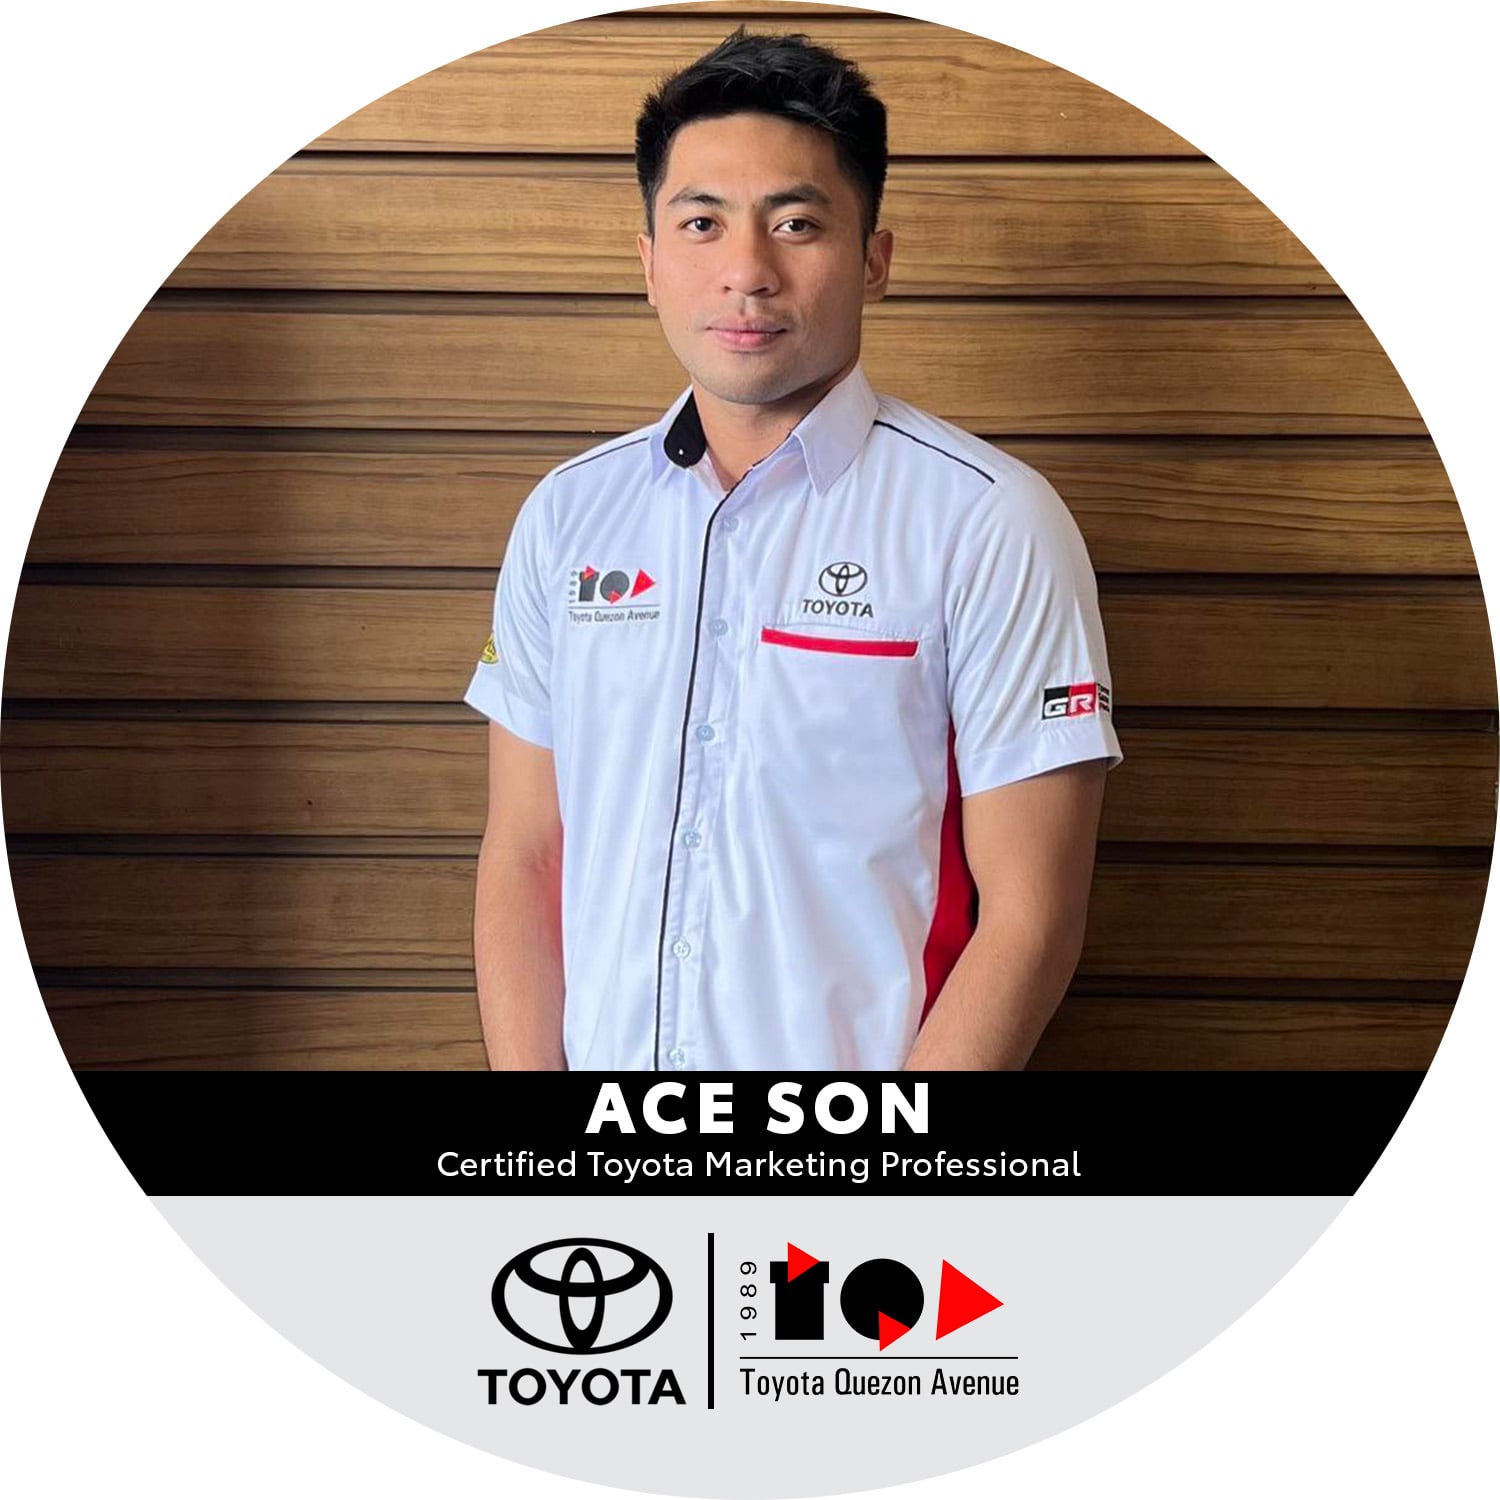 Certified Toyota Marketing Professionals - Ace Son